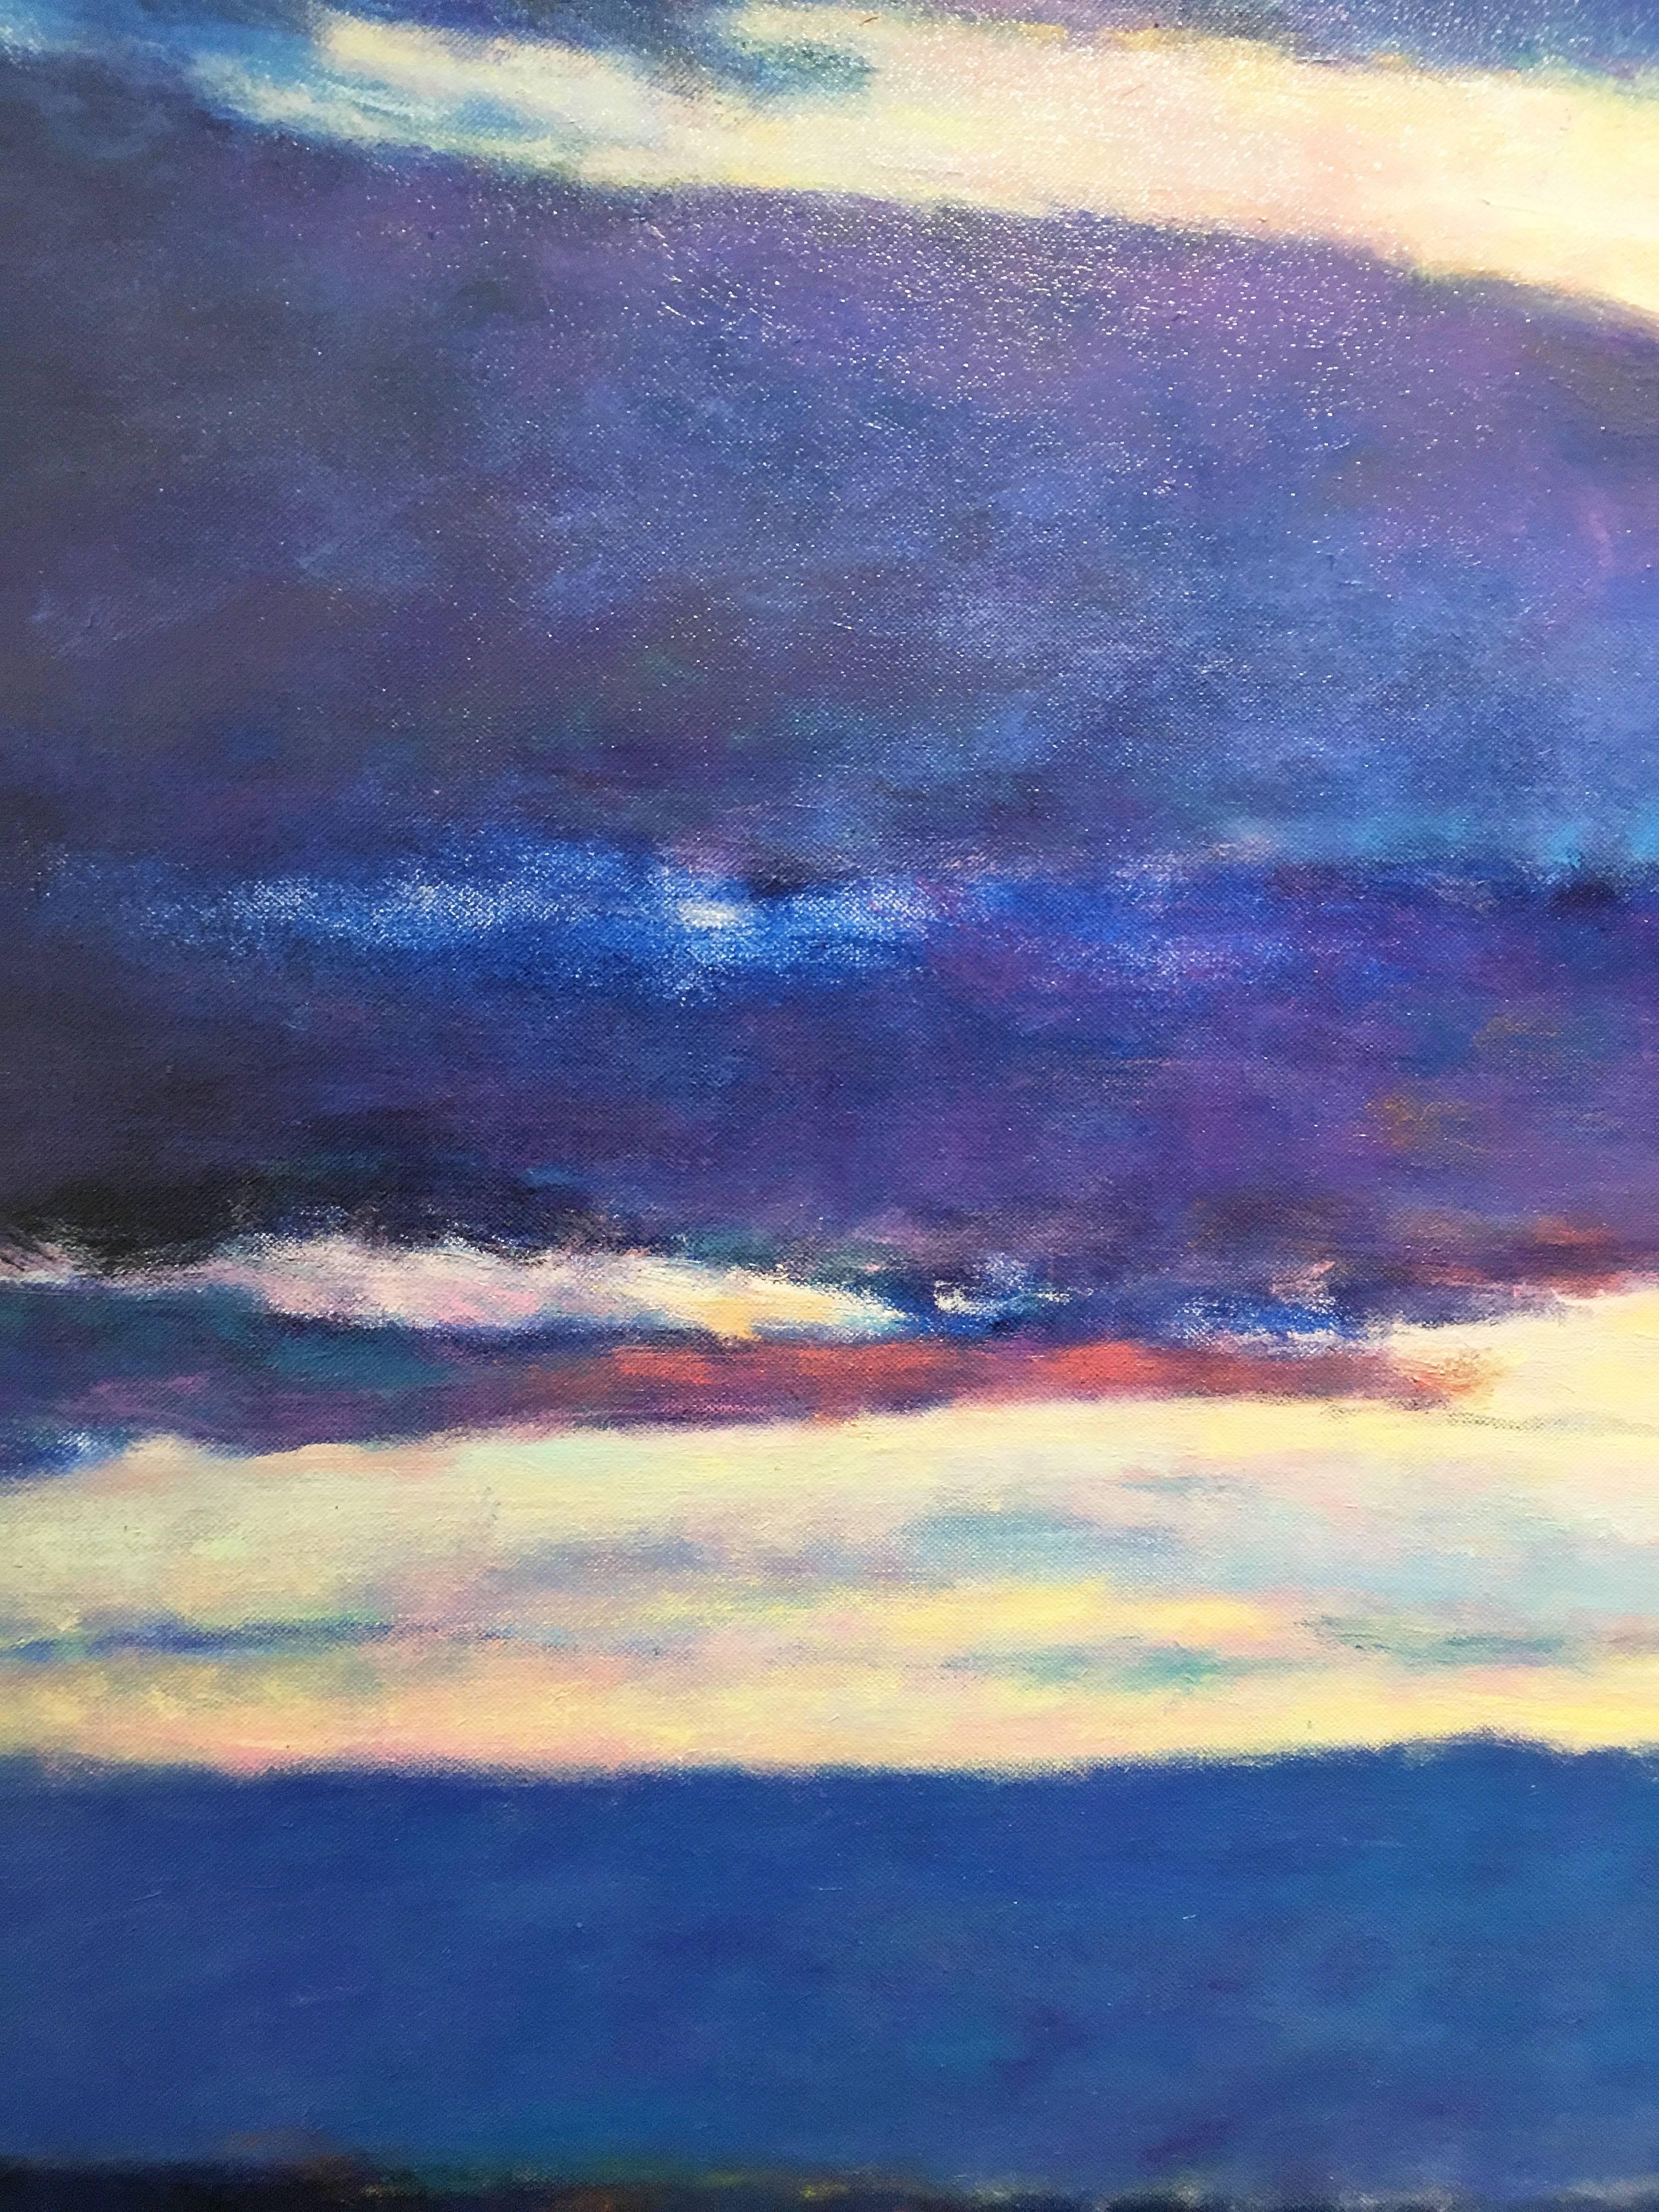 'Blue Skyscape' 2011 by American artist, Ken Elliott. Oil on canvas, 36 x 60 in. This painting of clouds and sky is primarily monochromatic. Comprising of the color blue in varying hues, the painting moves from left to right. The sun reflected